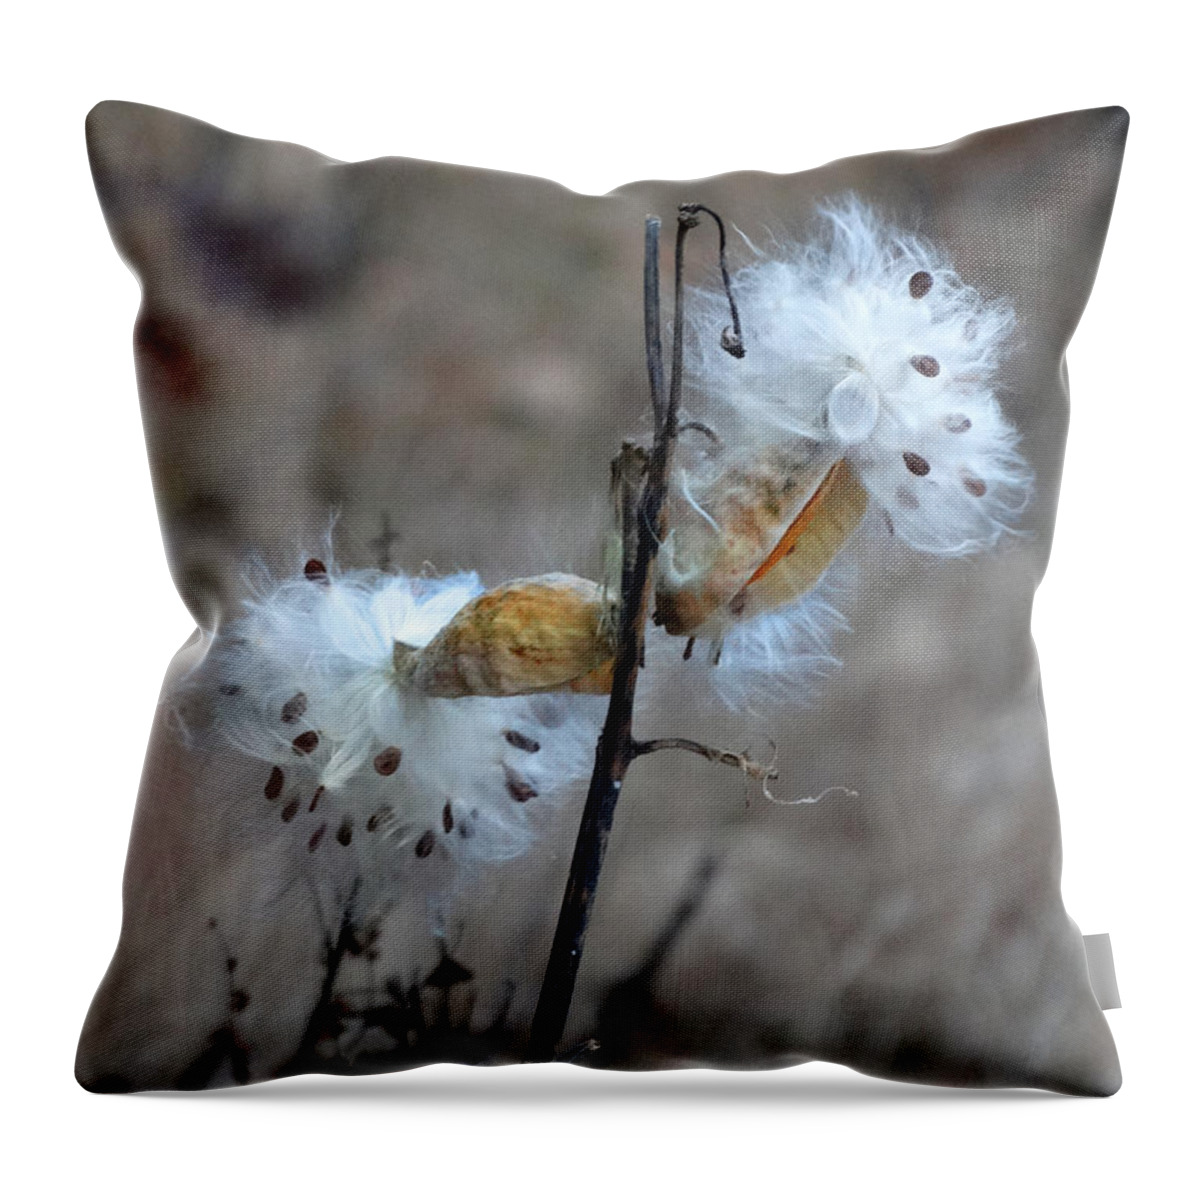 Seeds Throw Pillow featuring the photograph Milkweed Seed Pods by David T Wilkinson